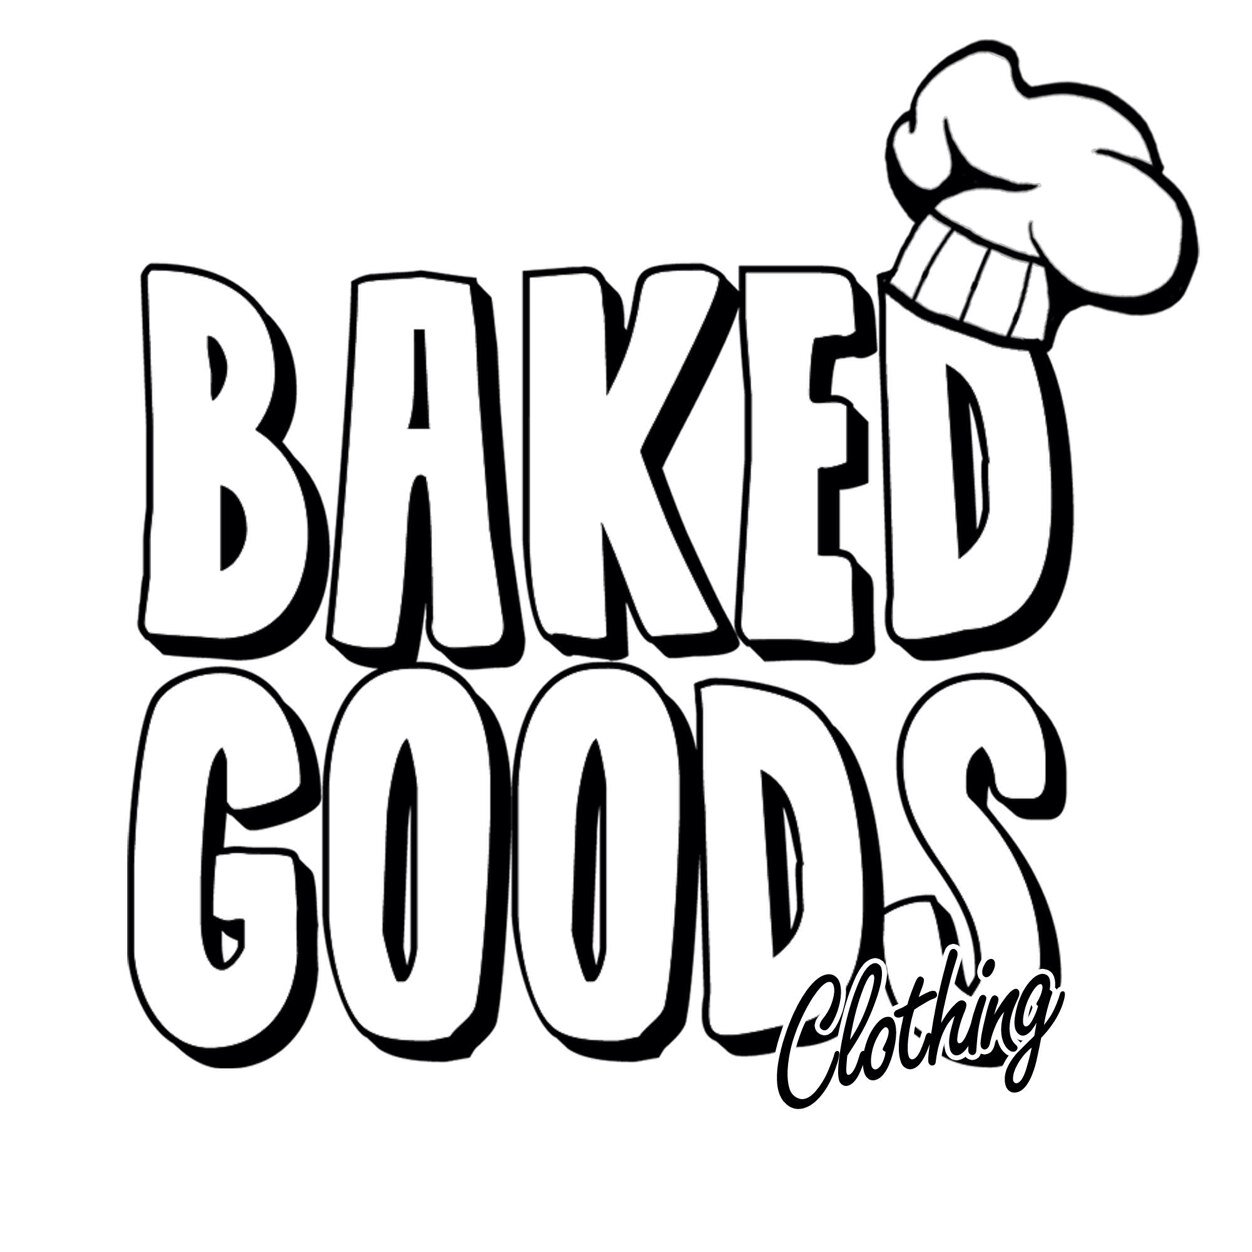 clip art images baked goods - photo #38